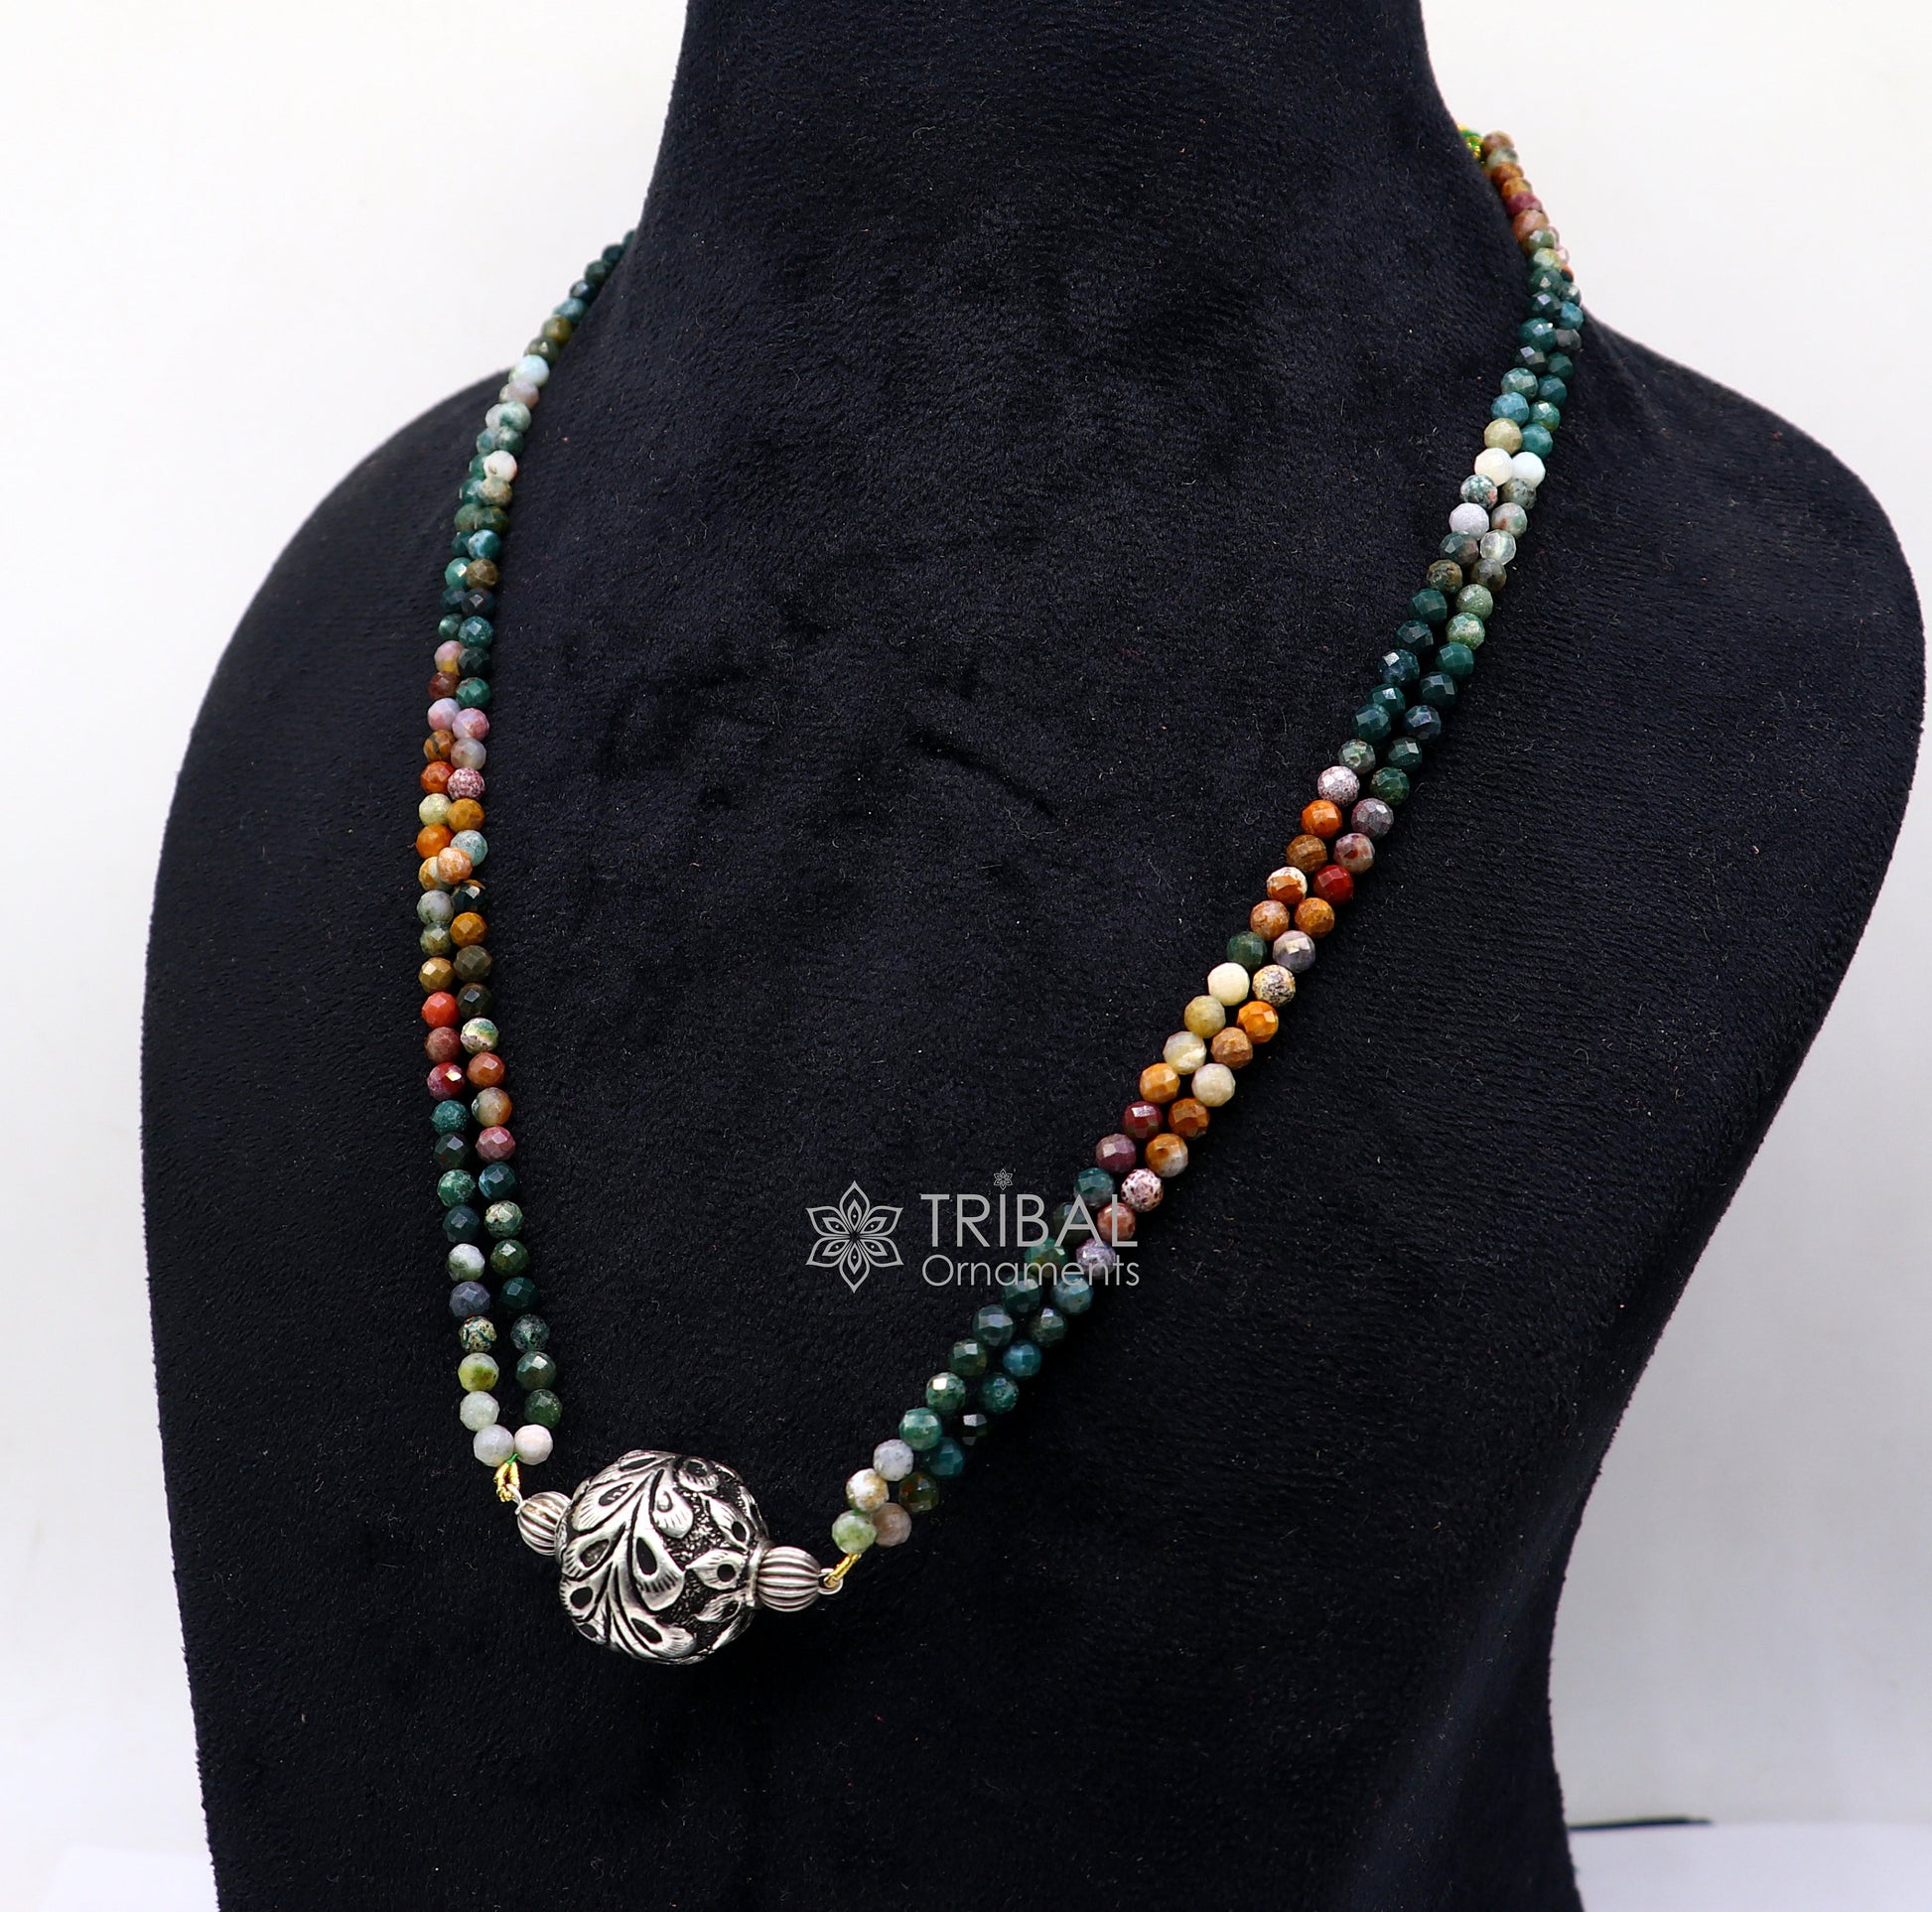 Trendy Indian traditional cultural natural stone beaded 925 sterling silver ball pendant necklace, choker tribal ethnic jewelry set610 - TRIBAL ORNAMENTS